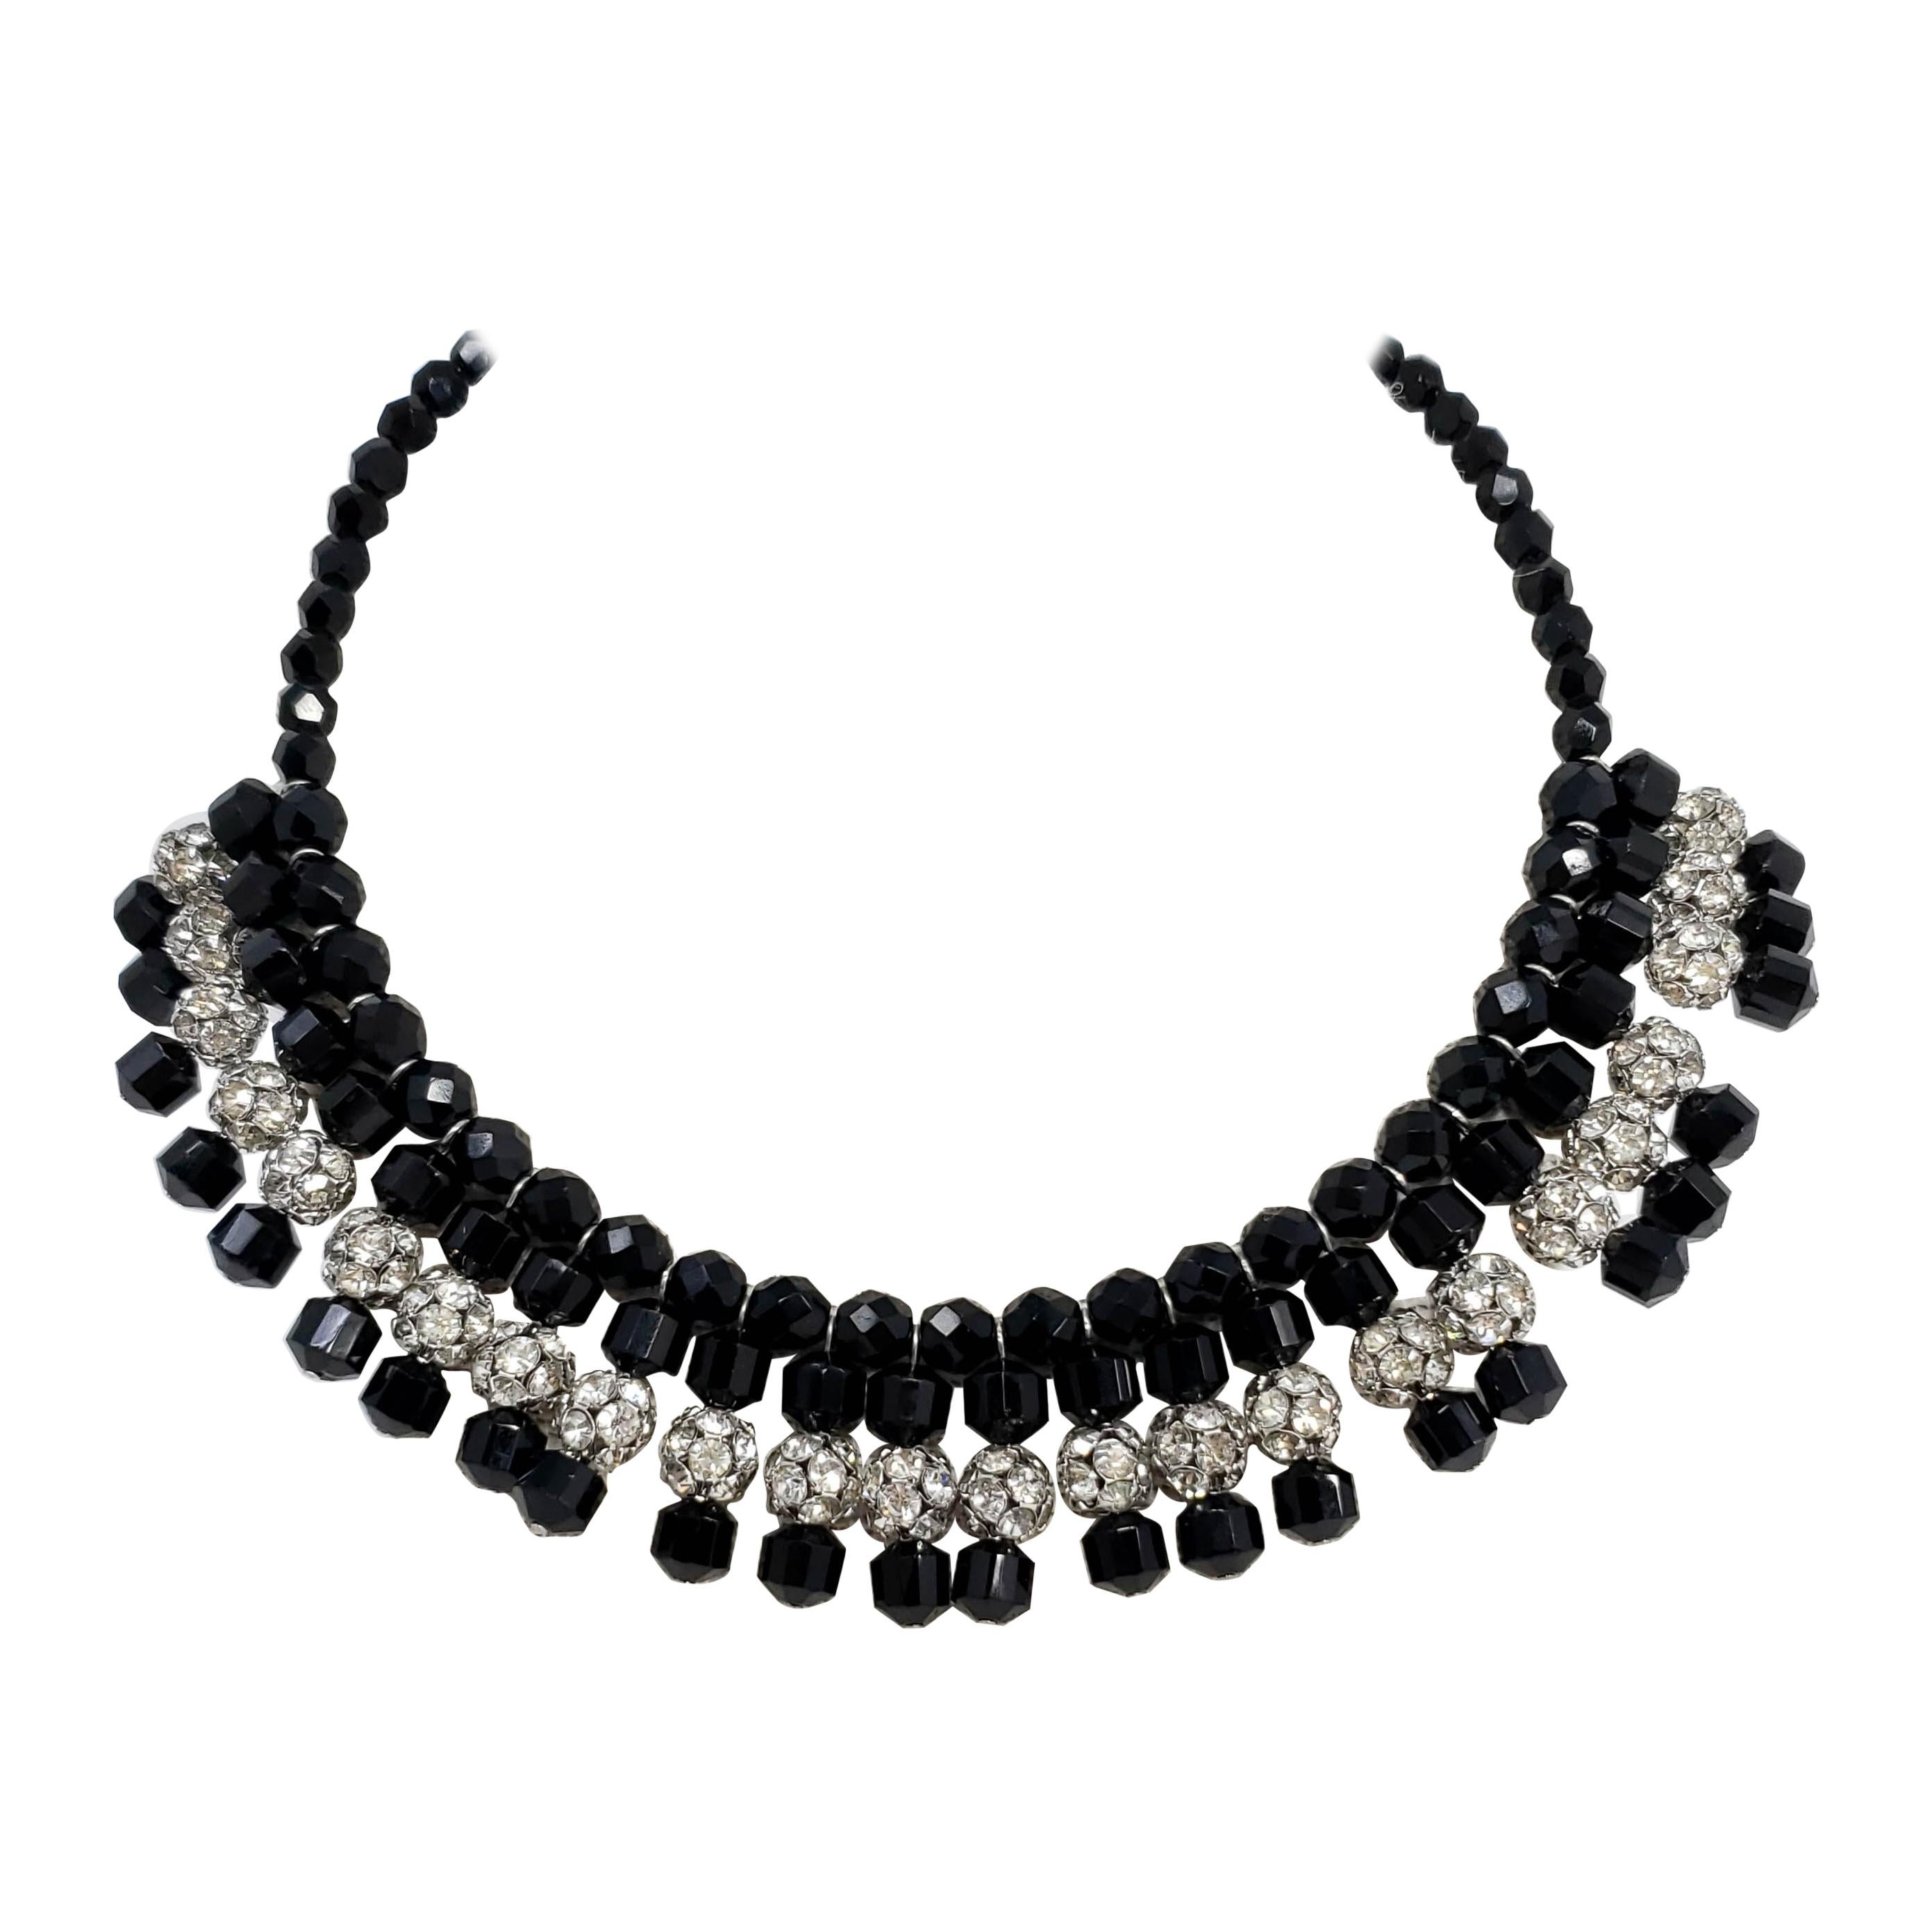 Jet Black and Clear pave Glass Ball and Bead Collar Necklace, Vintage Mid 1900s For Sale